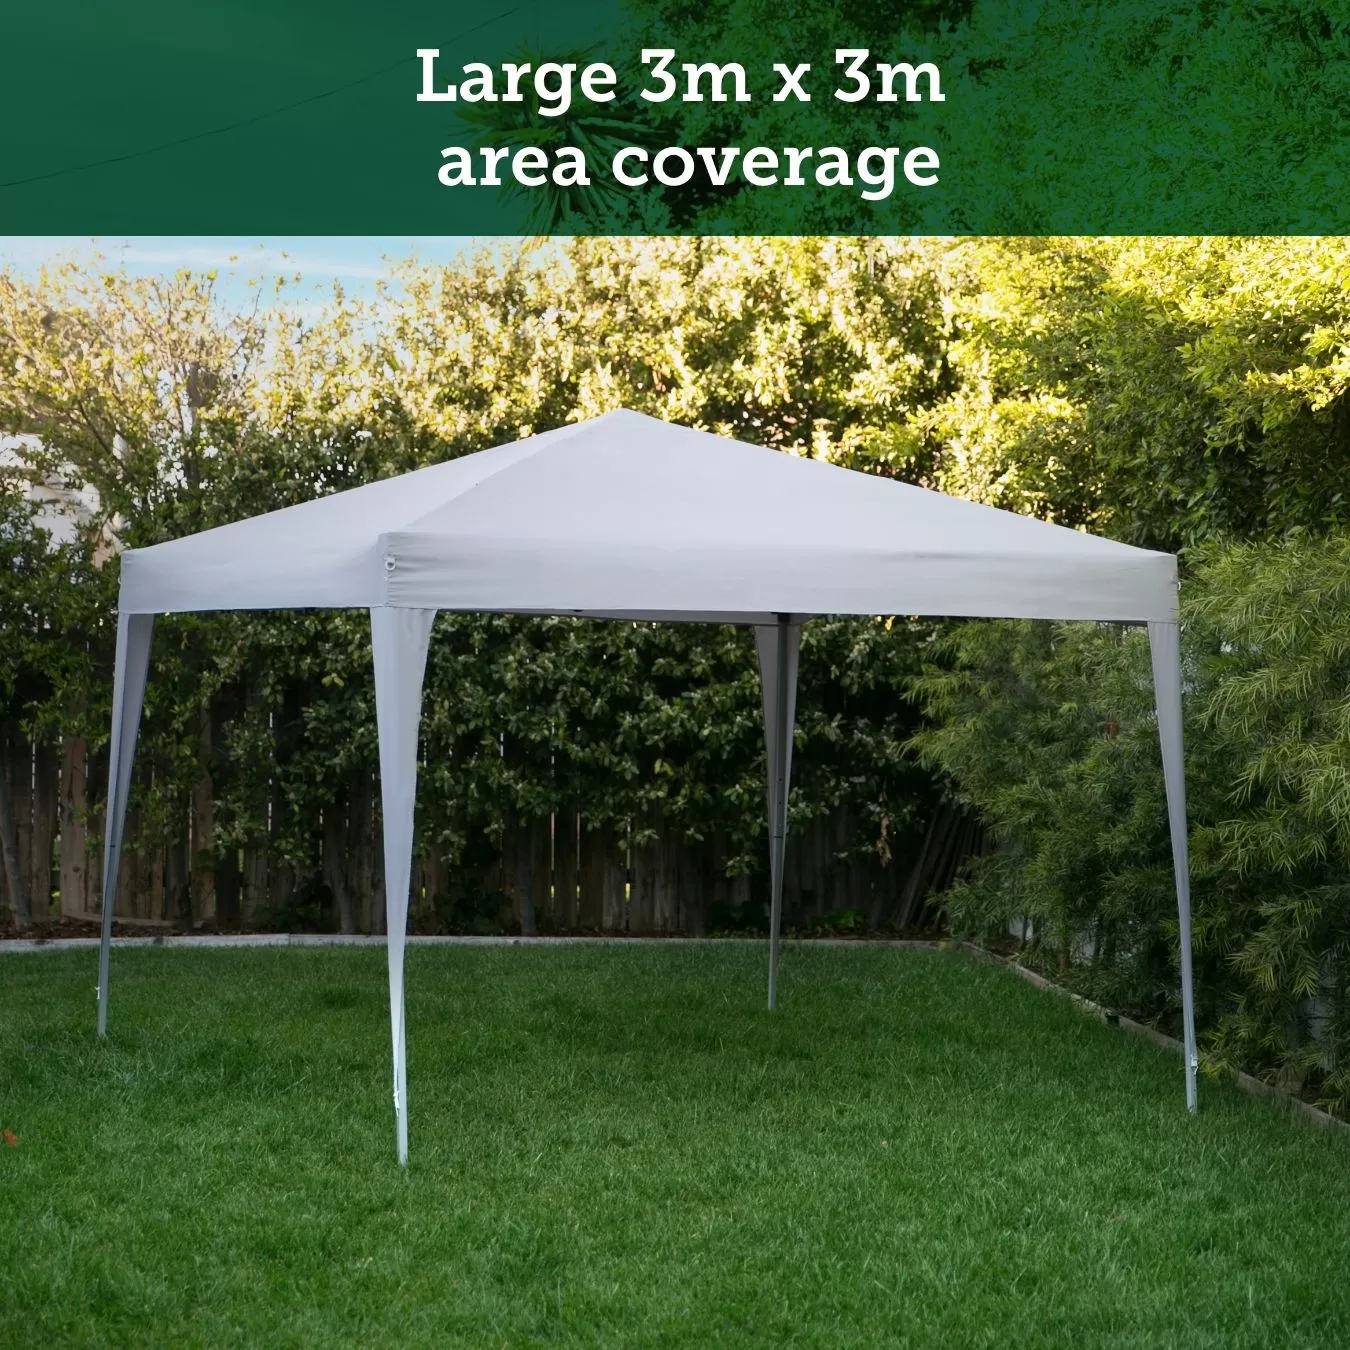 ShadeHaven by AriaLiving - 3m x 3m Pop-up Gazebo